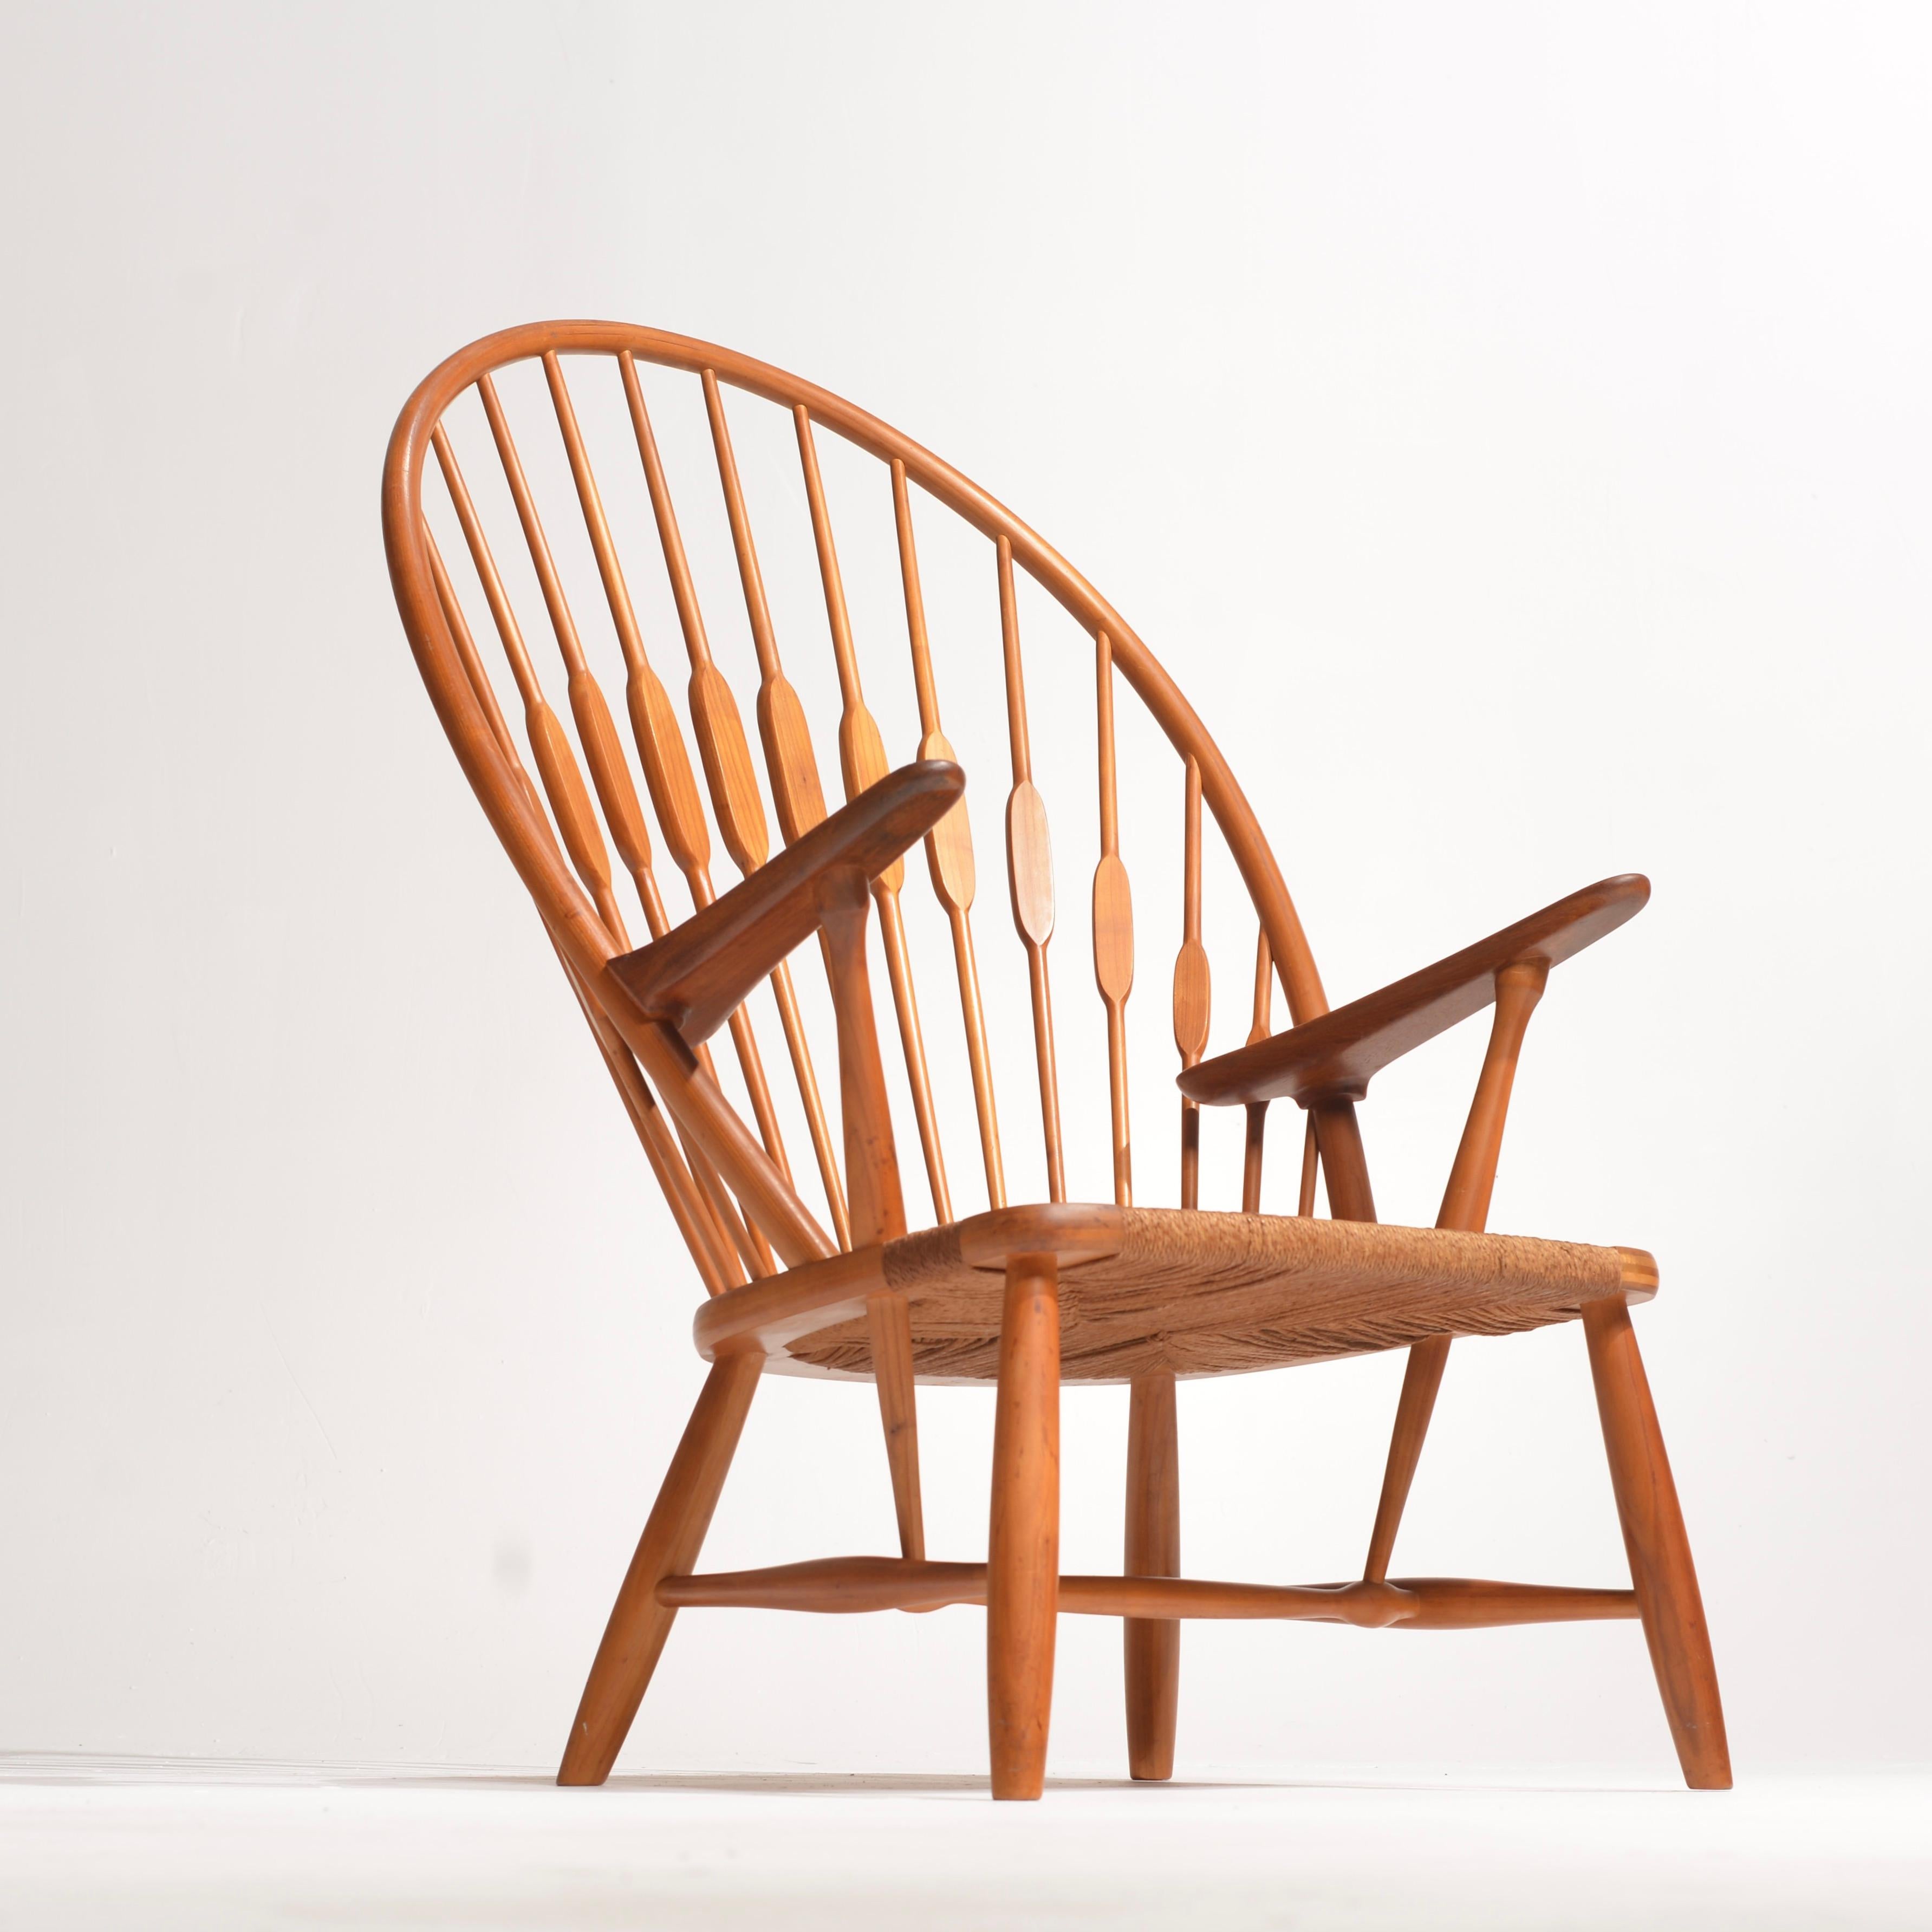 Hans Wegner JH-550 Peacock chair for Johannes Hansen Iconic 'Peacock' Chair Model JH-550 produced by furniture maker Johannes Hansen in Denmark. Inspired by a traditional English Windsor chair, the Peacock chair is one of Wegner's finest examples of